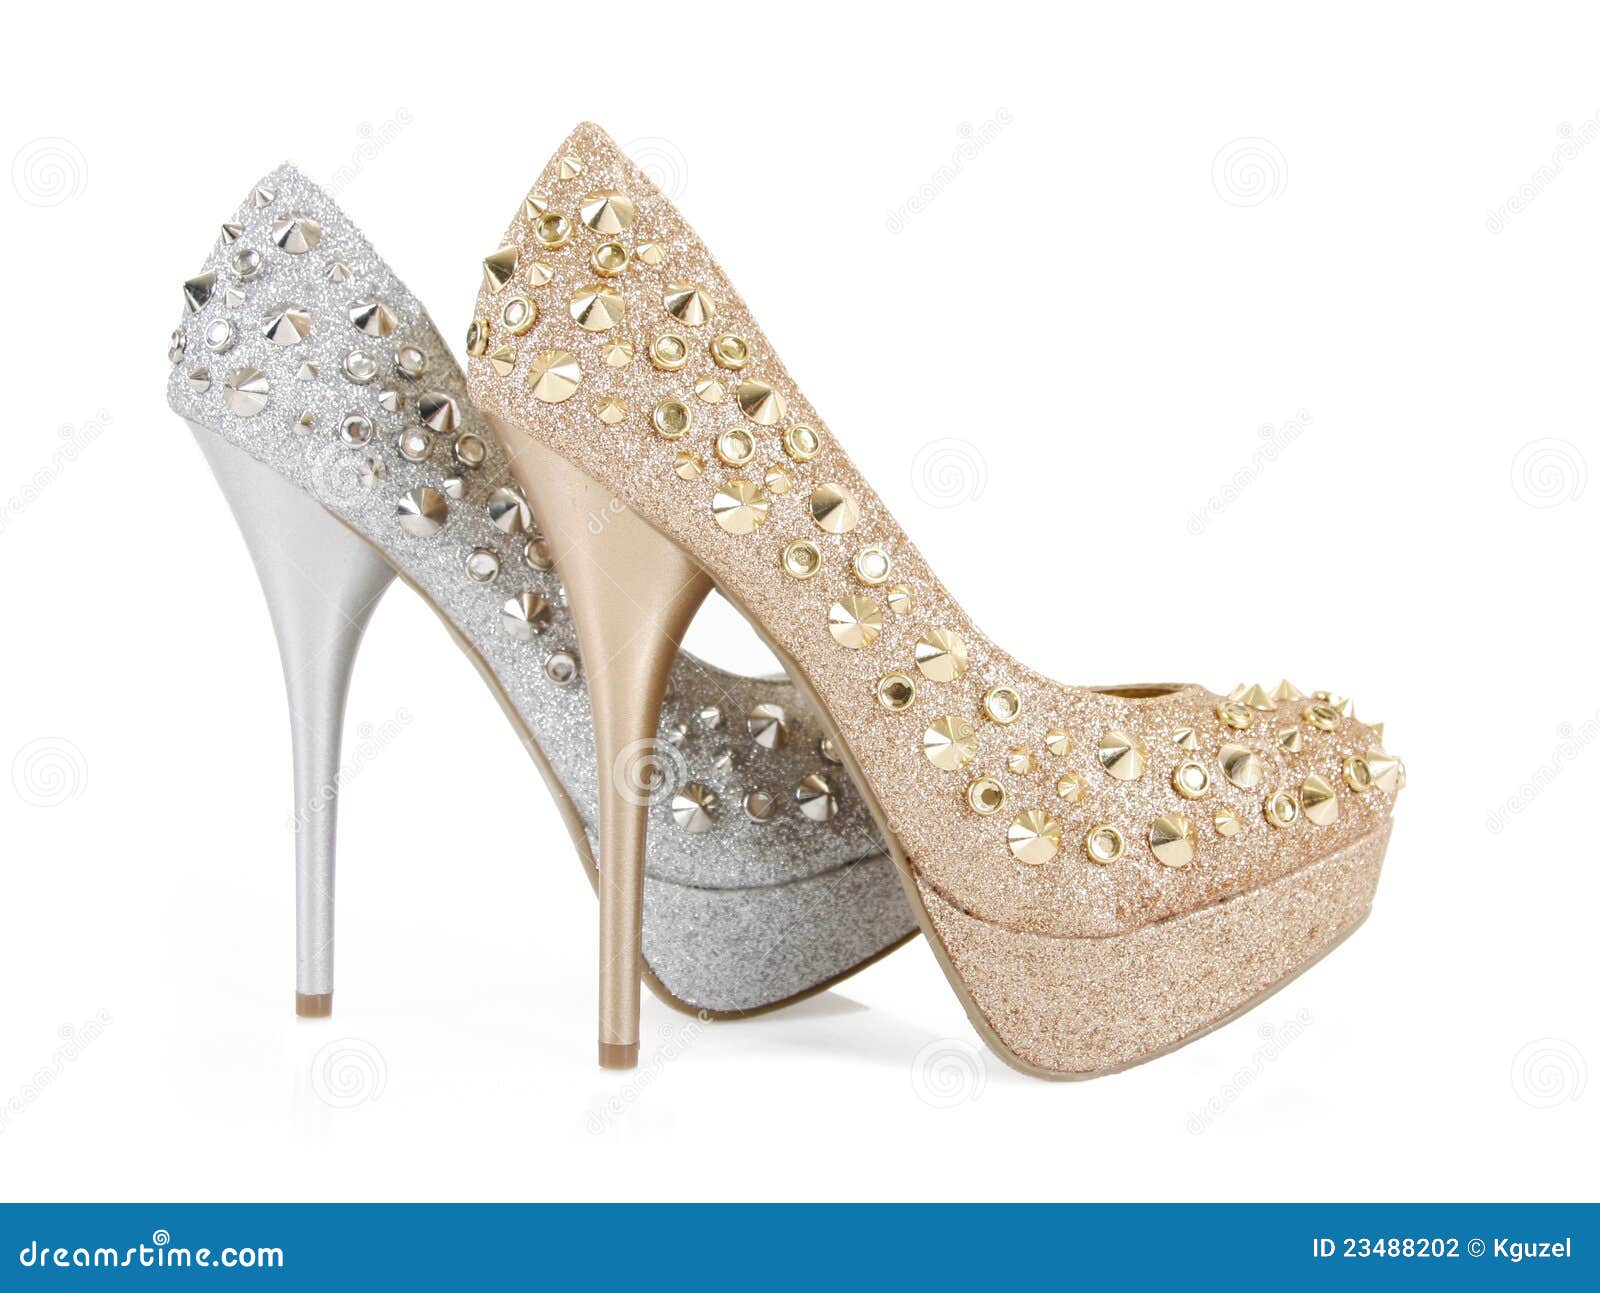 Glitter spiked club shoes stock photo. Image of shoes - 23488202